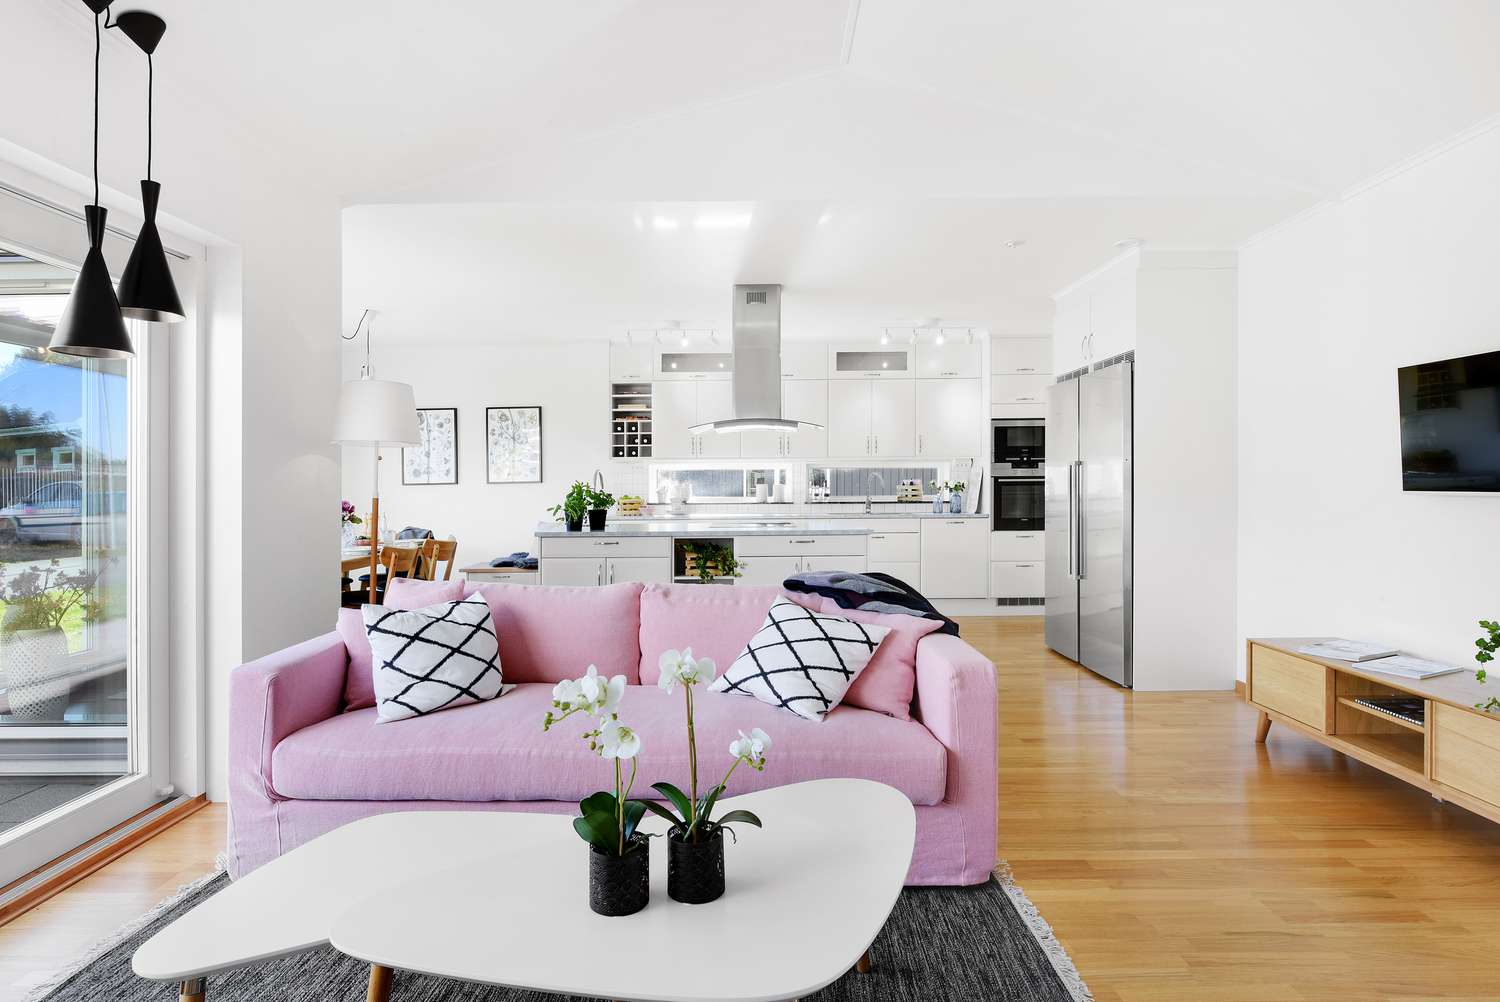 Open floor plan home with pink couch in the living room area